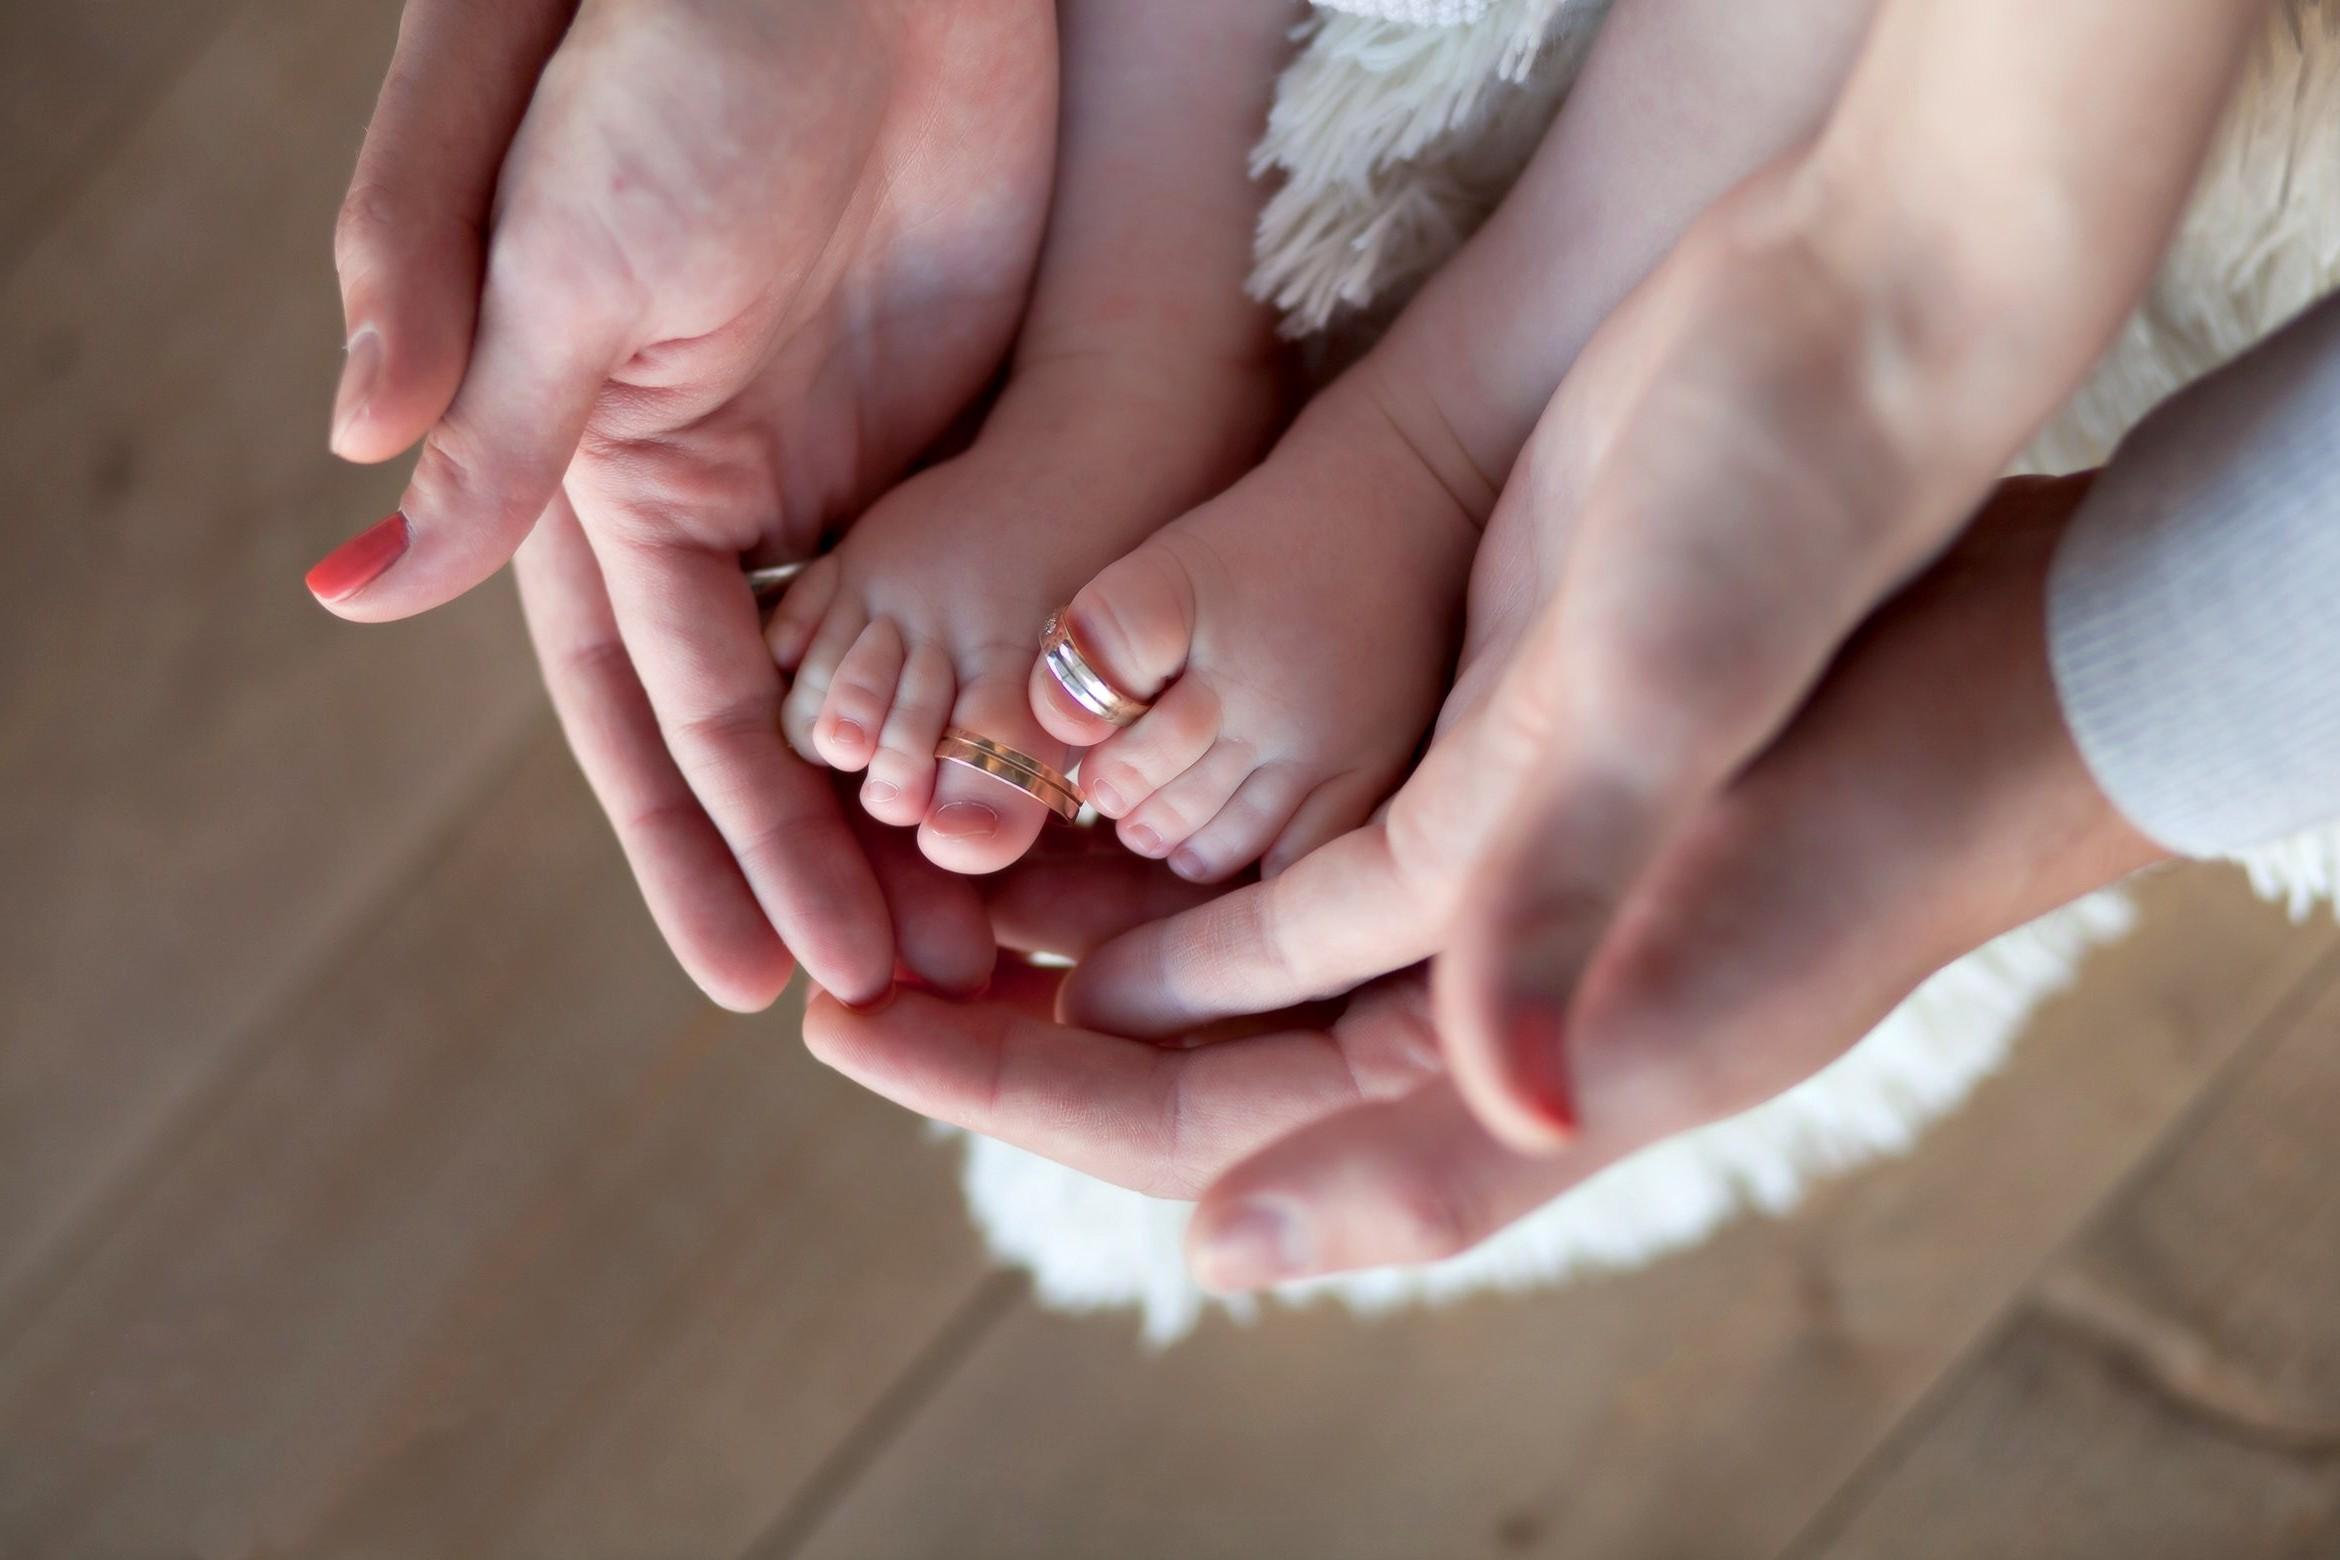 Wallpaper, feet, baby, mouth, holding hands, skin, child, hand